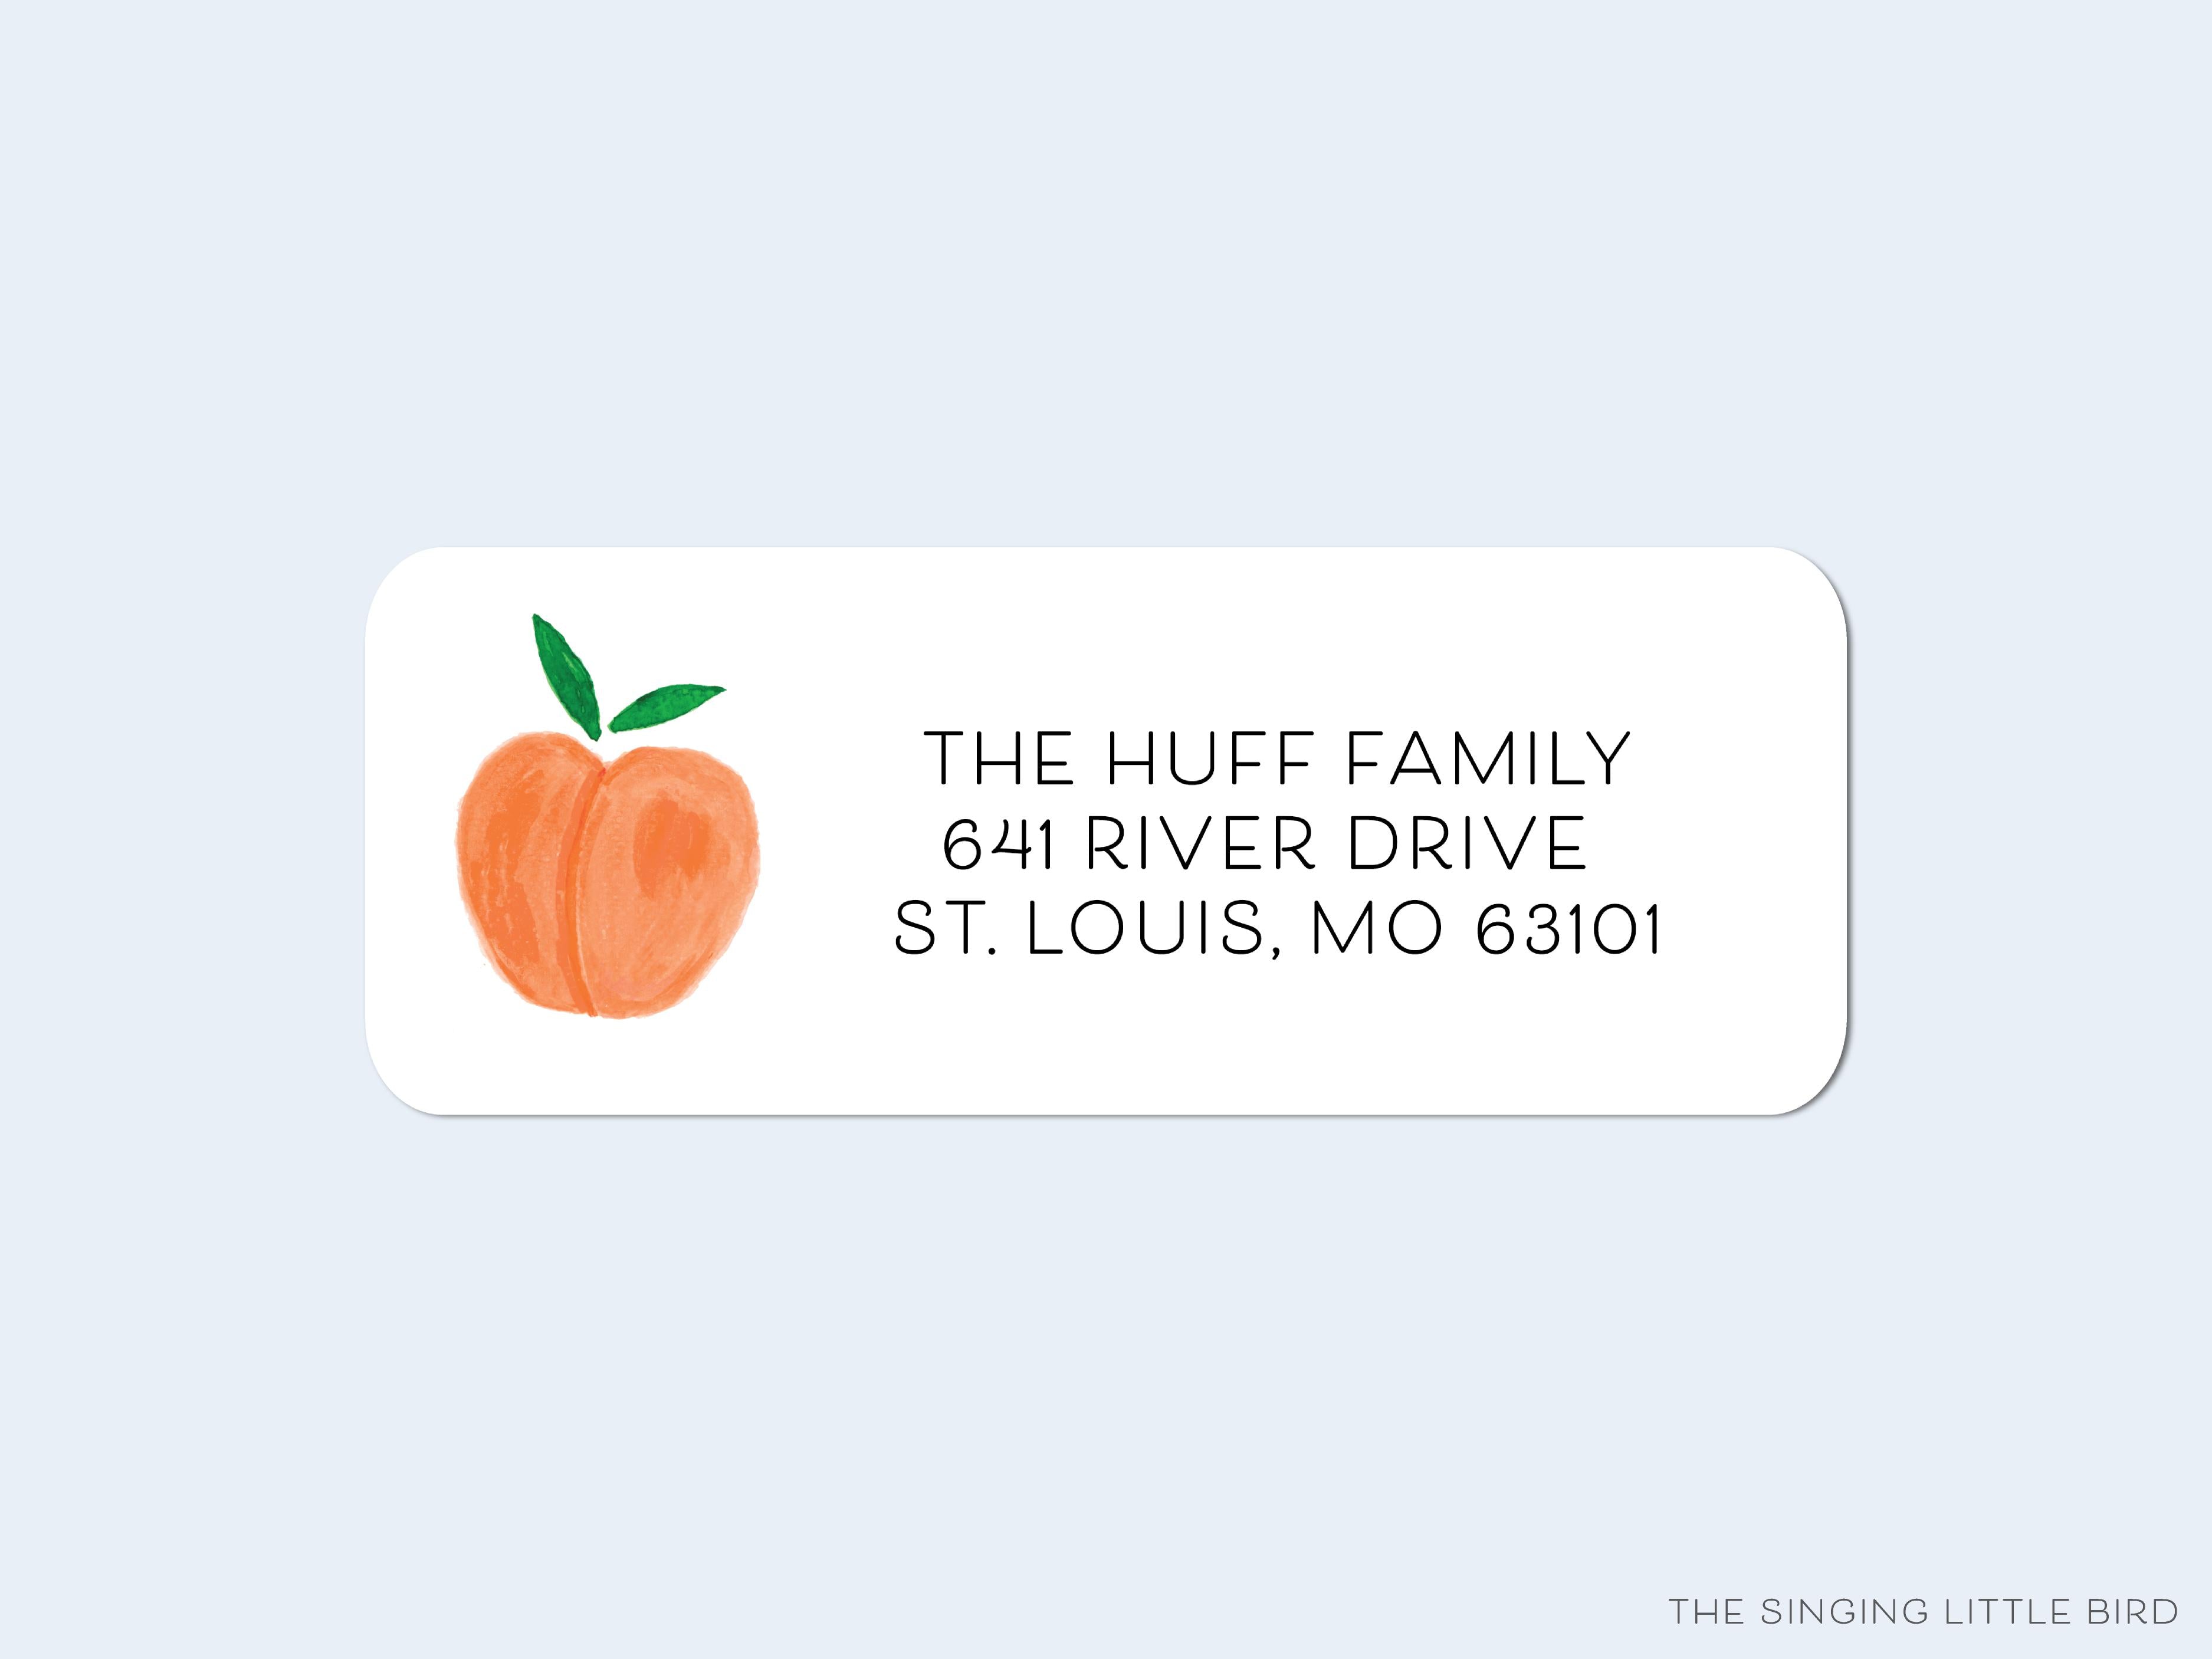 Peach Return Address Labels-These personalized return address labels are 2.625" x 1" and feature our hand-painted watercolor Peach, printed in the USA on beautiful matte finish labels. These make great gifts for yourself or the fruit lover.-The Singing Little Bird